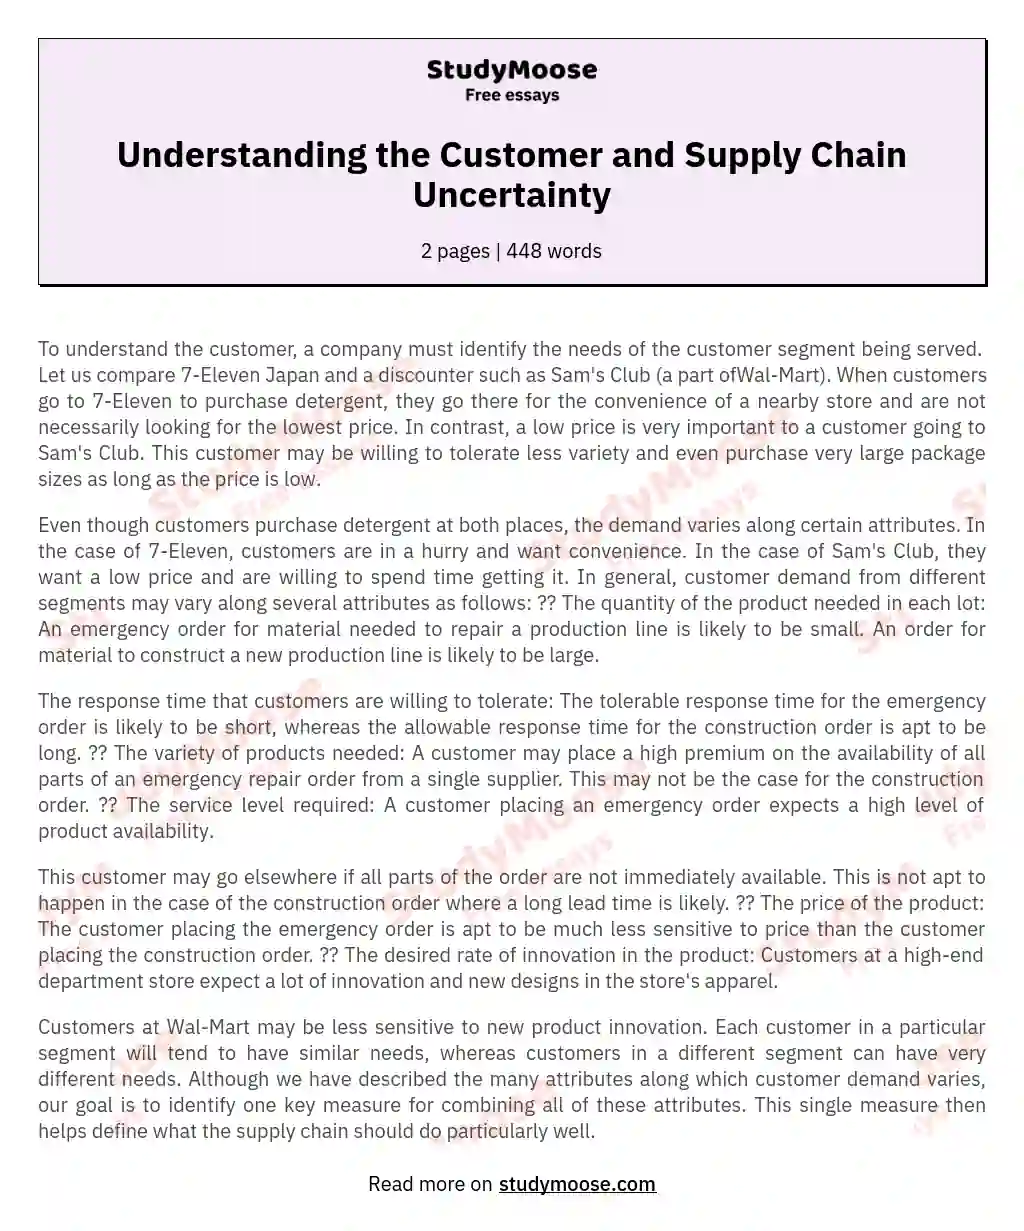 Understanding the Customer and Supply Chain Uncertainty essay